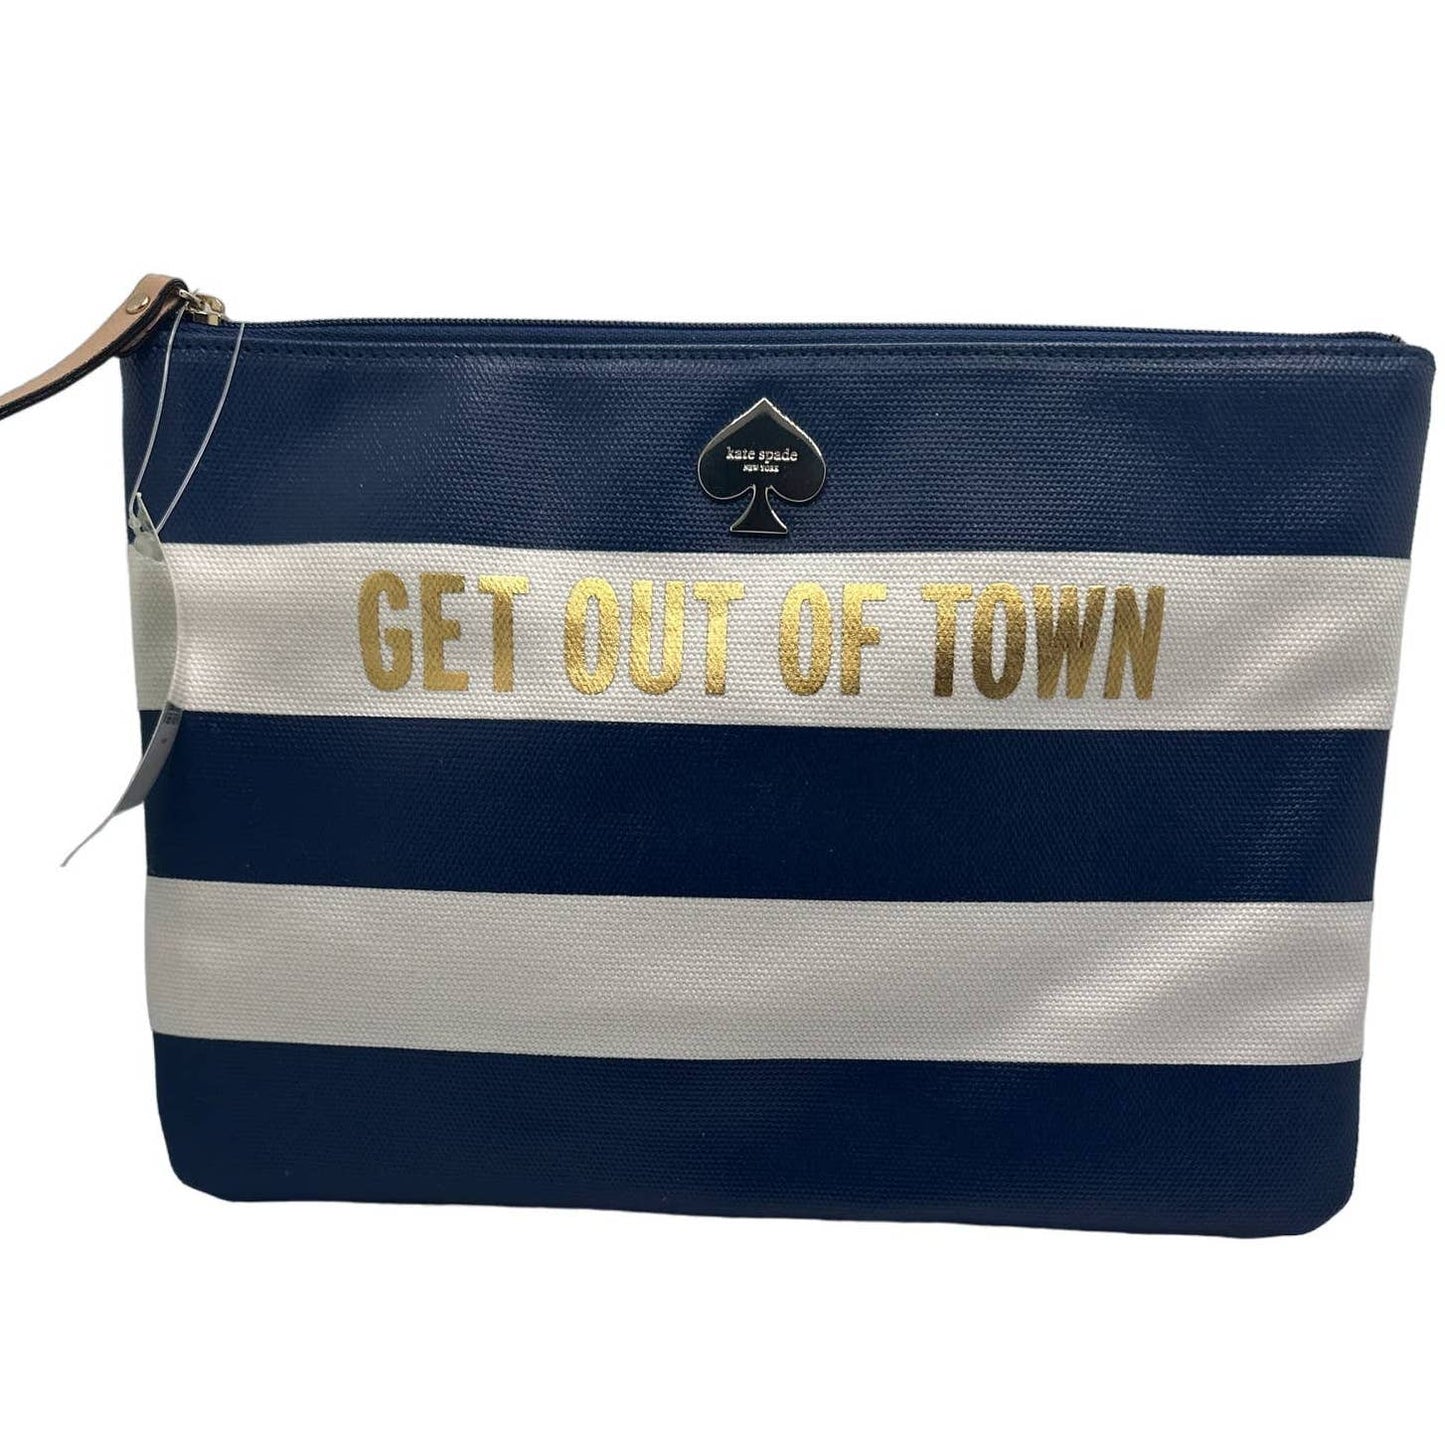 NWT KATE SPADE New York GET OUT OF TOWN Strips Pouch / Cosmetic Case